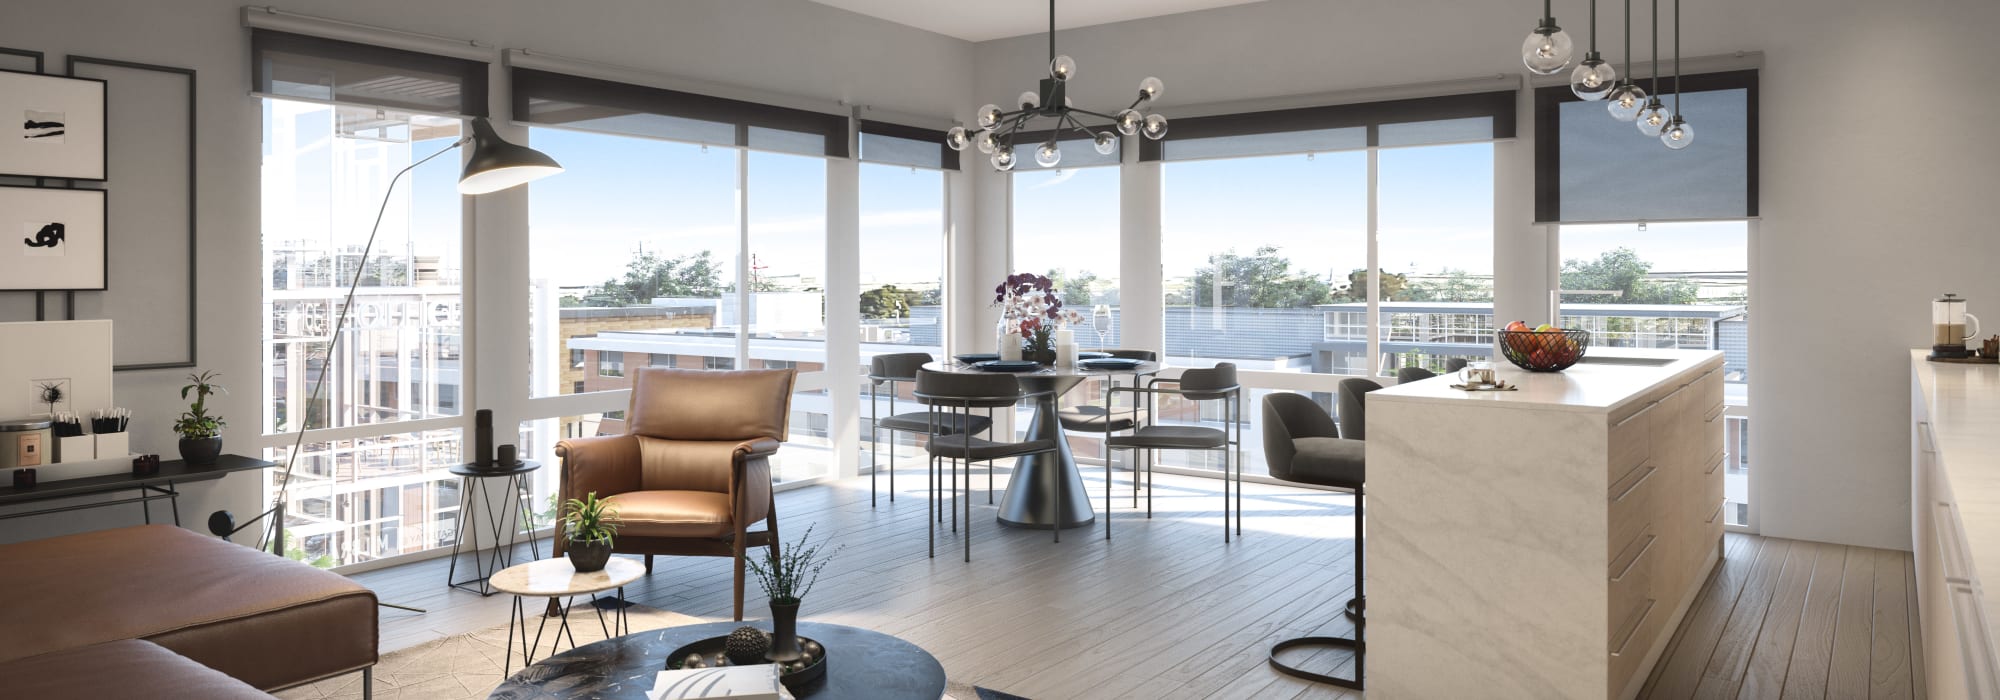 a luxury kitchen with a view at Station 16 Apartments in Millbrae, California